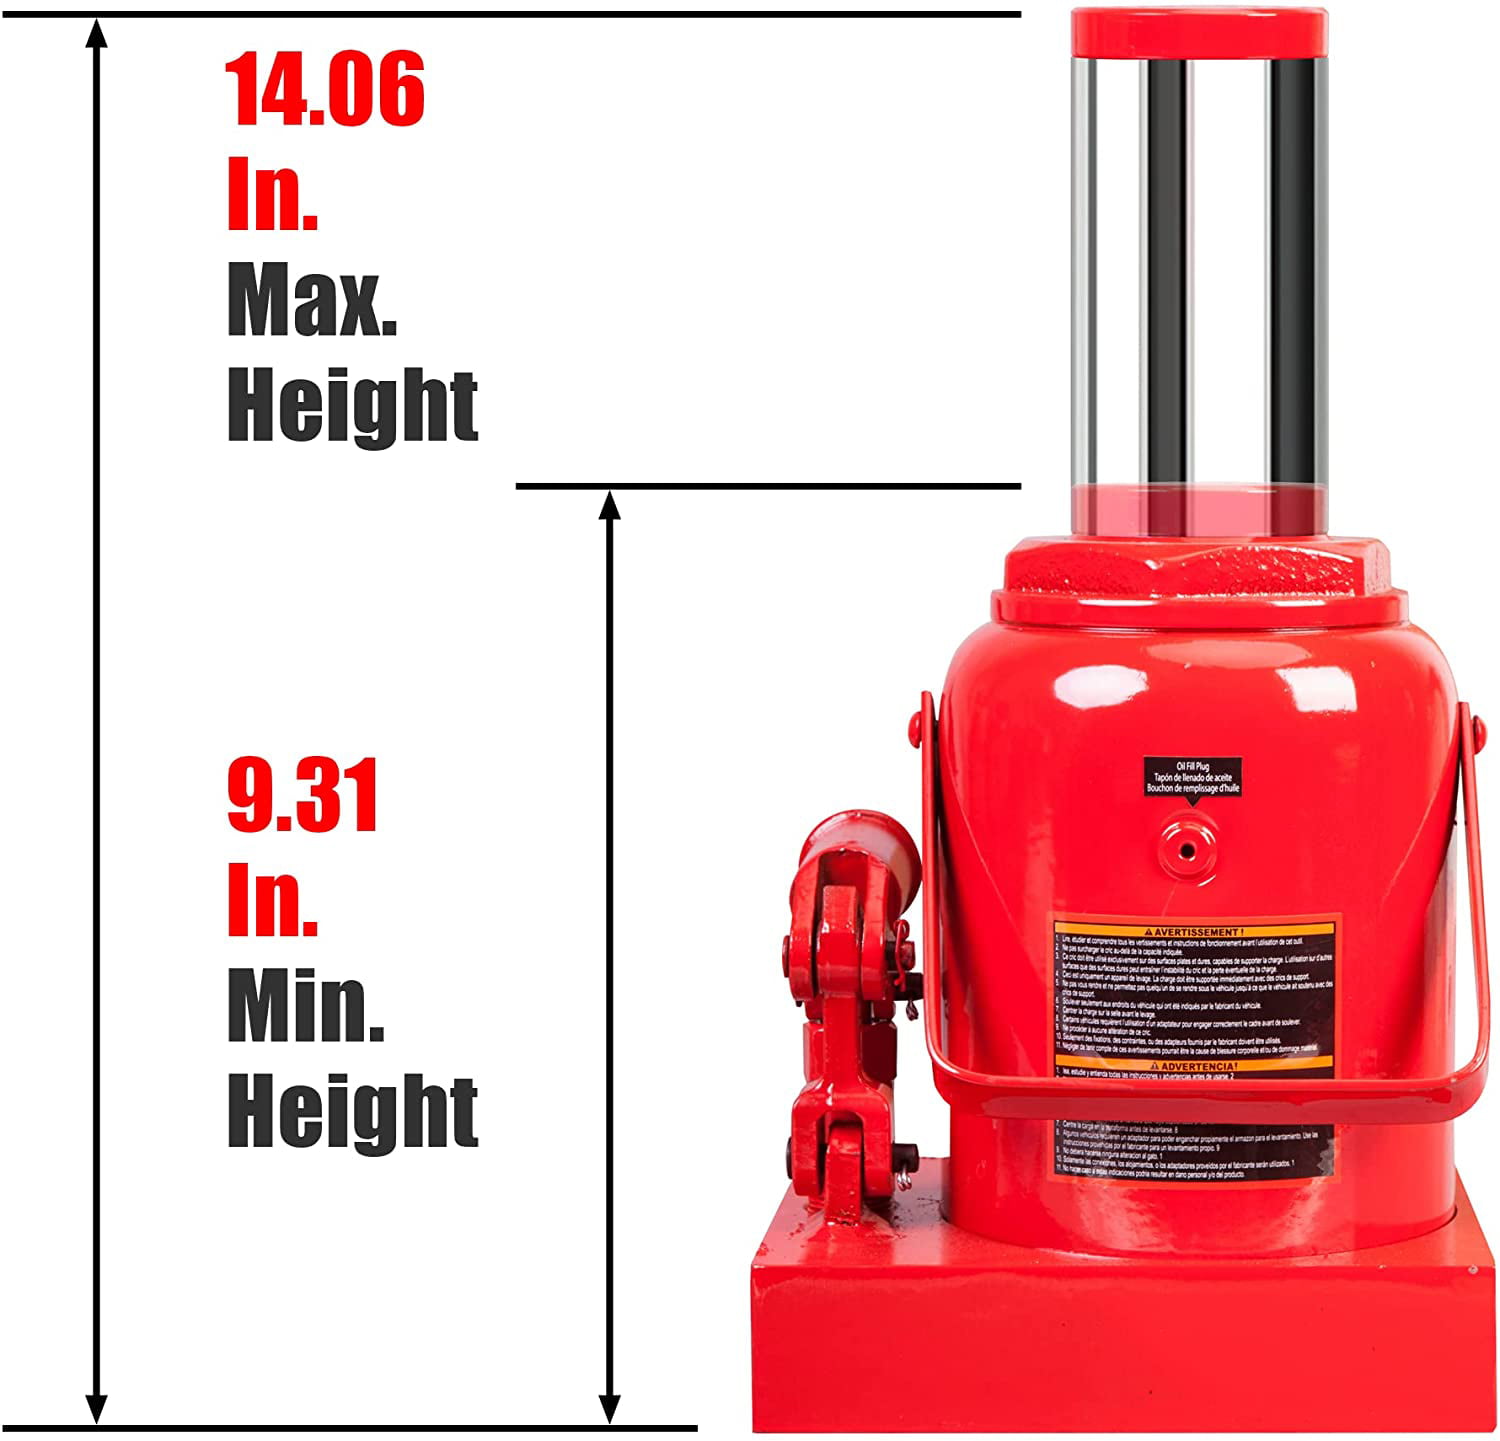 BIG RED Hydraulic Stubby Low Profile Welded Bottle Jack, 50 Ton (100,000 lb)  Capacity, Red, W950R